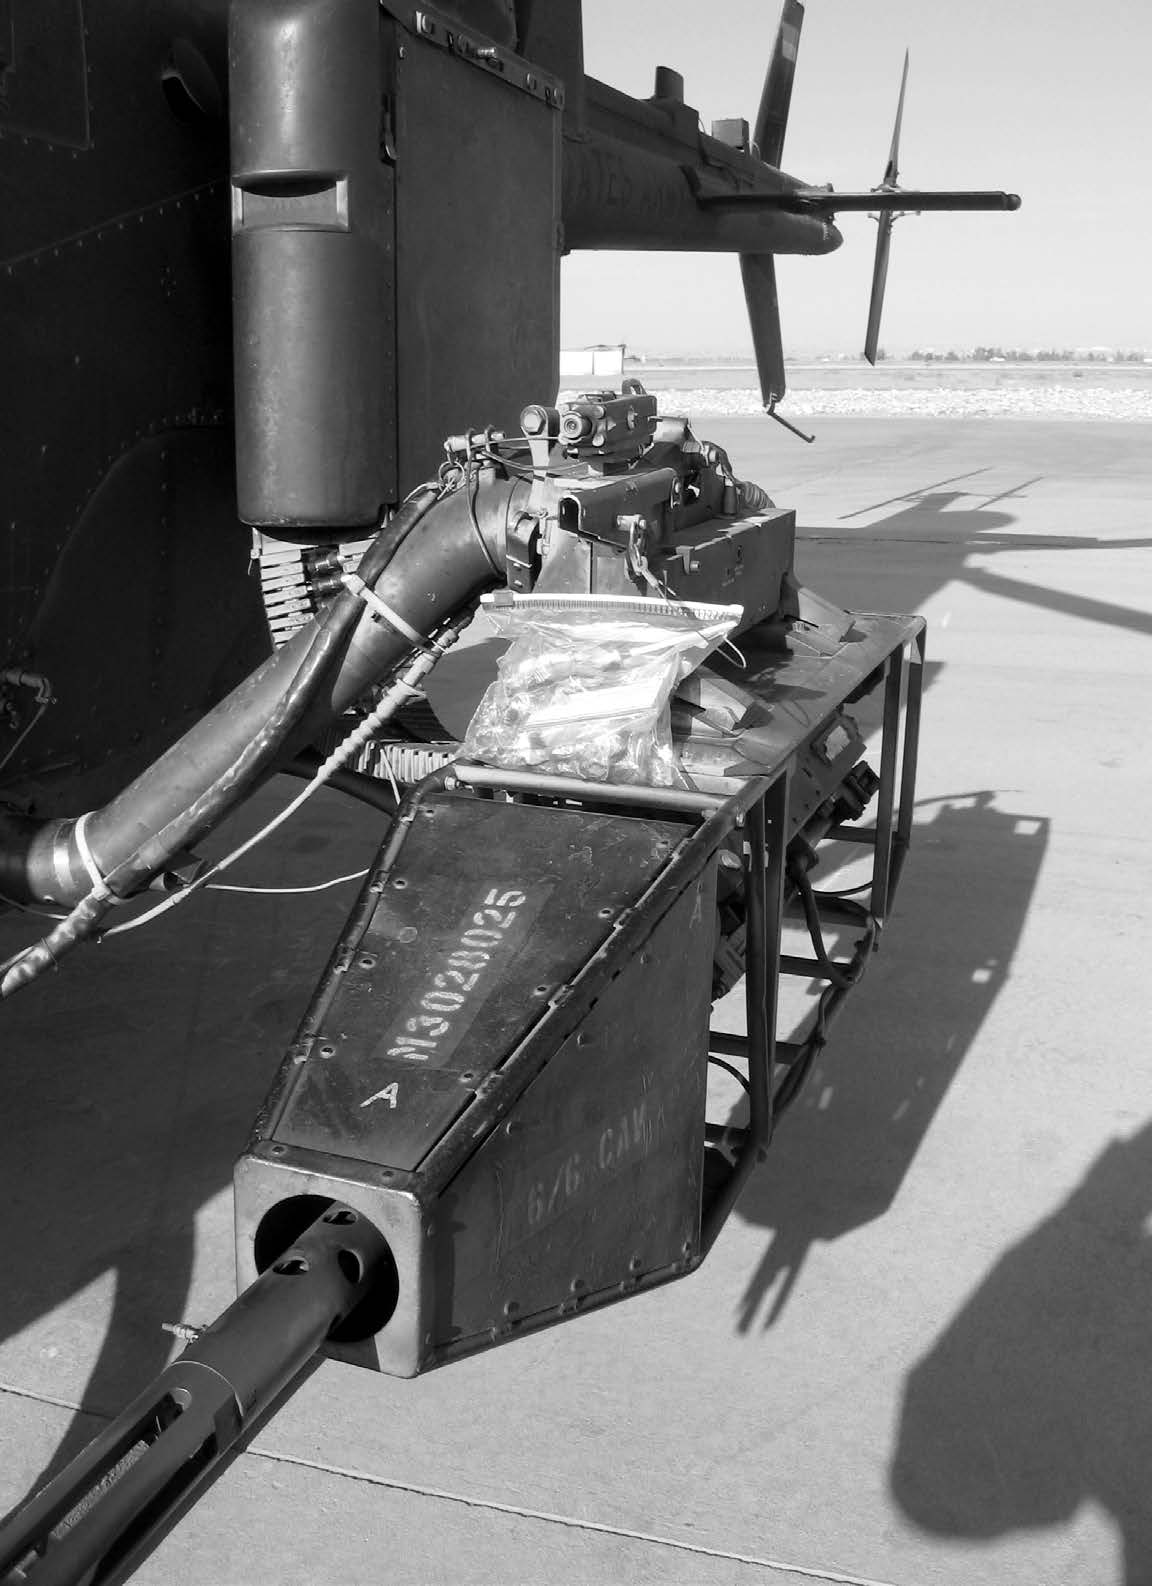 While Captain Scott P. Pace, a U.S. Army aviator, was attempting to drop candy to Afghan children from this helicopter, the bag got stuck on his left .50 caliber machine gun. Courtesy of Scott P. Pace.